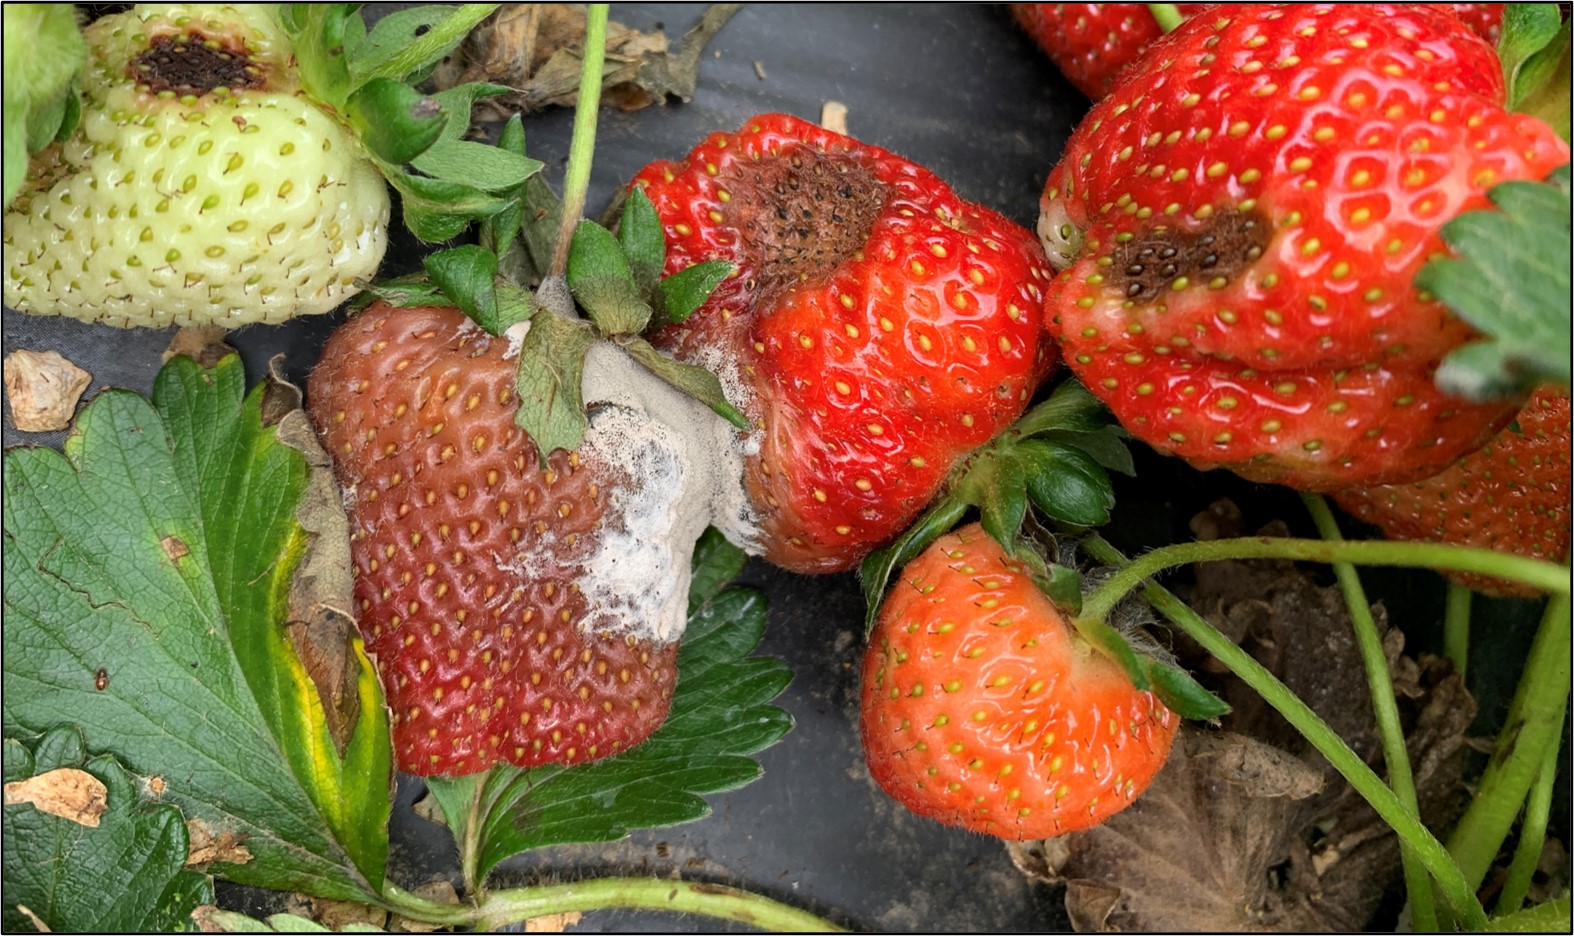 Botrytis Fruit Rot and Anthracnose Fruit Rot on Strawberry